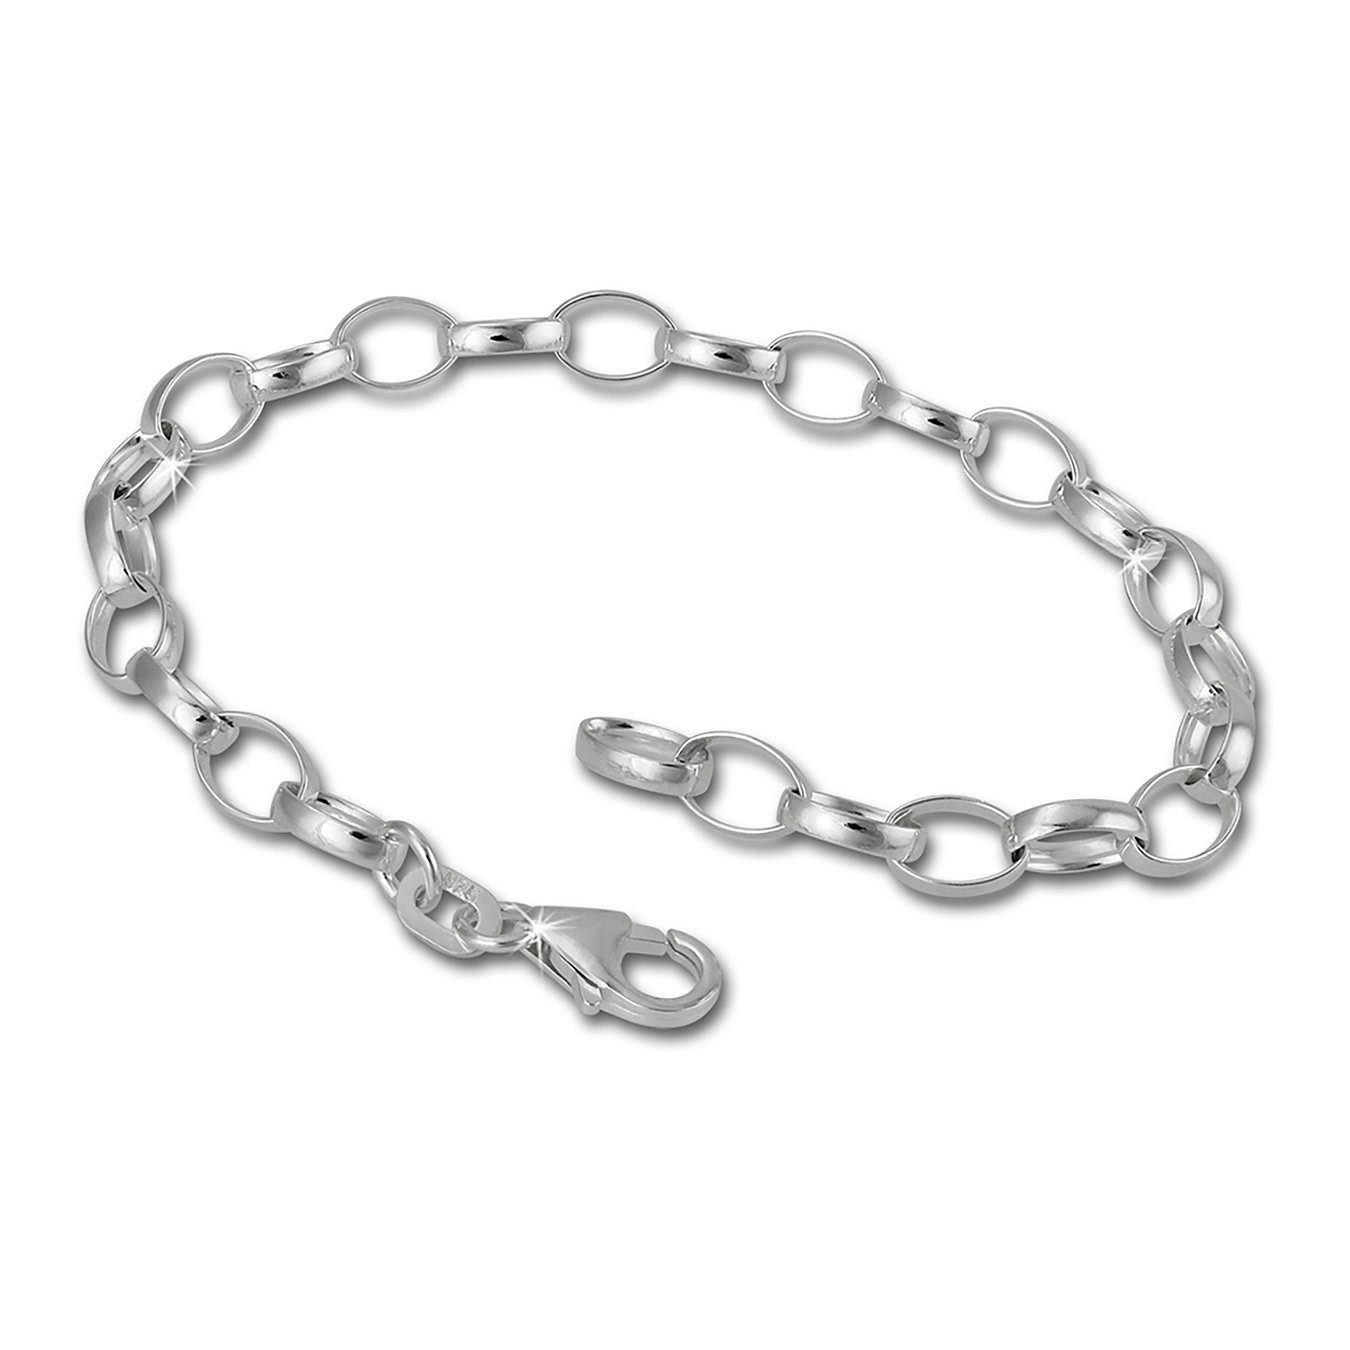 SilberDream Fußkette FC01XF SilberDream Charmsfußkette für SilberCharms, Charms Fußketten ca. 25cm, 925 Sterling Silber, Farbe: silber, Made-In